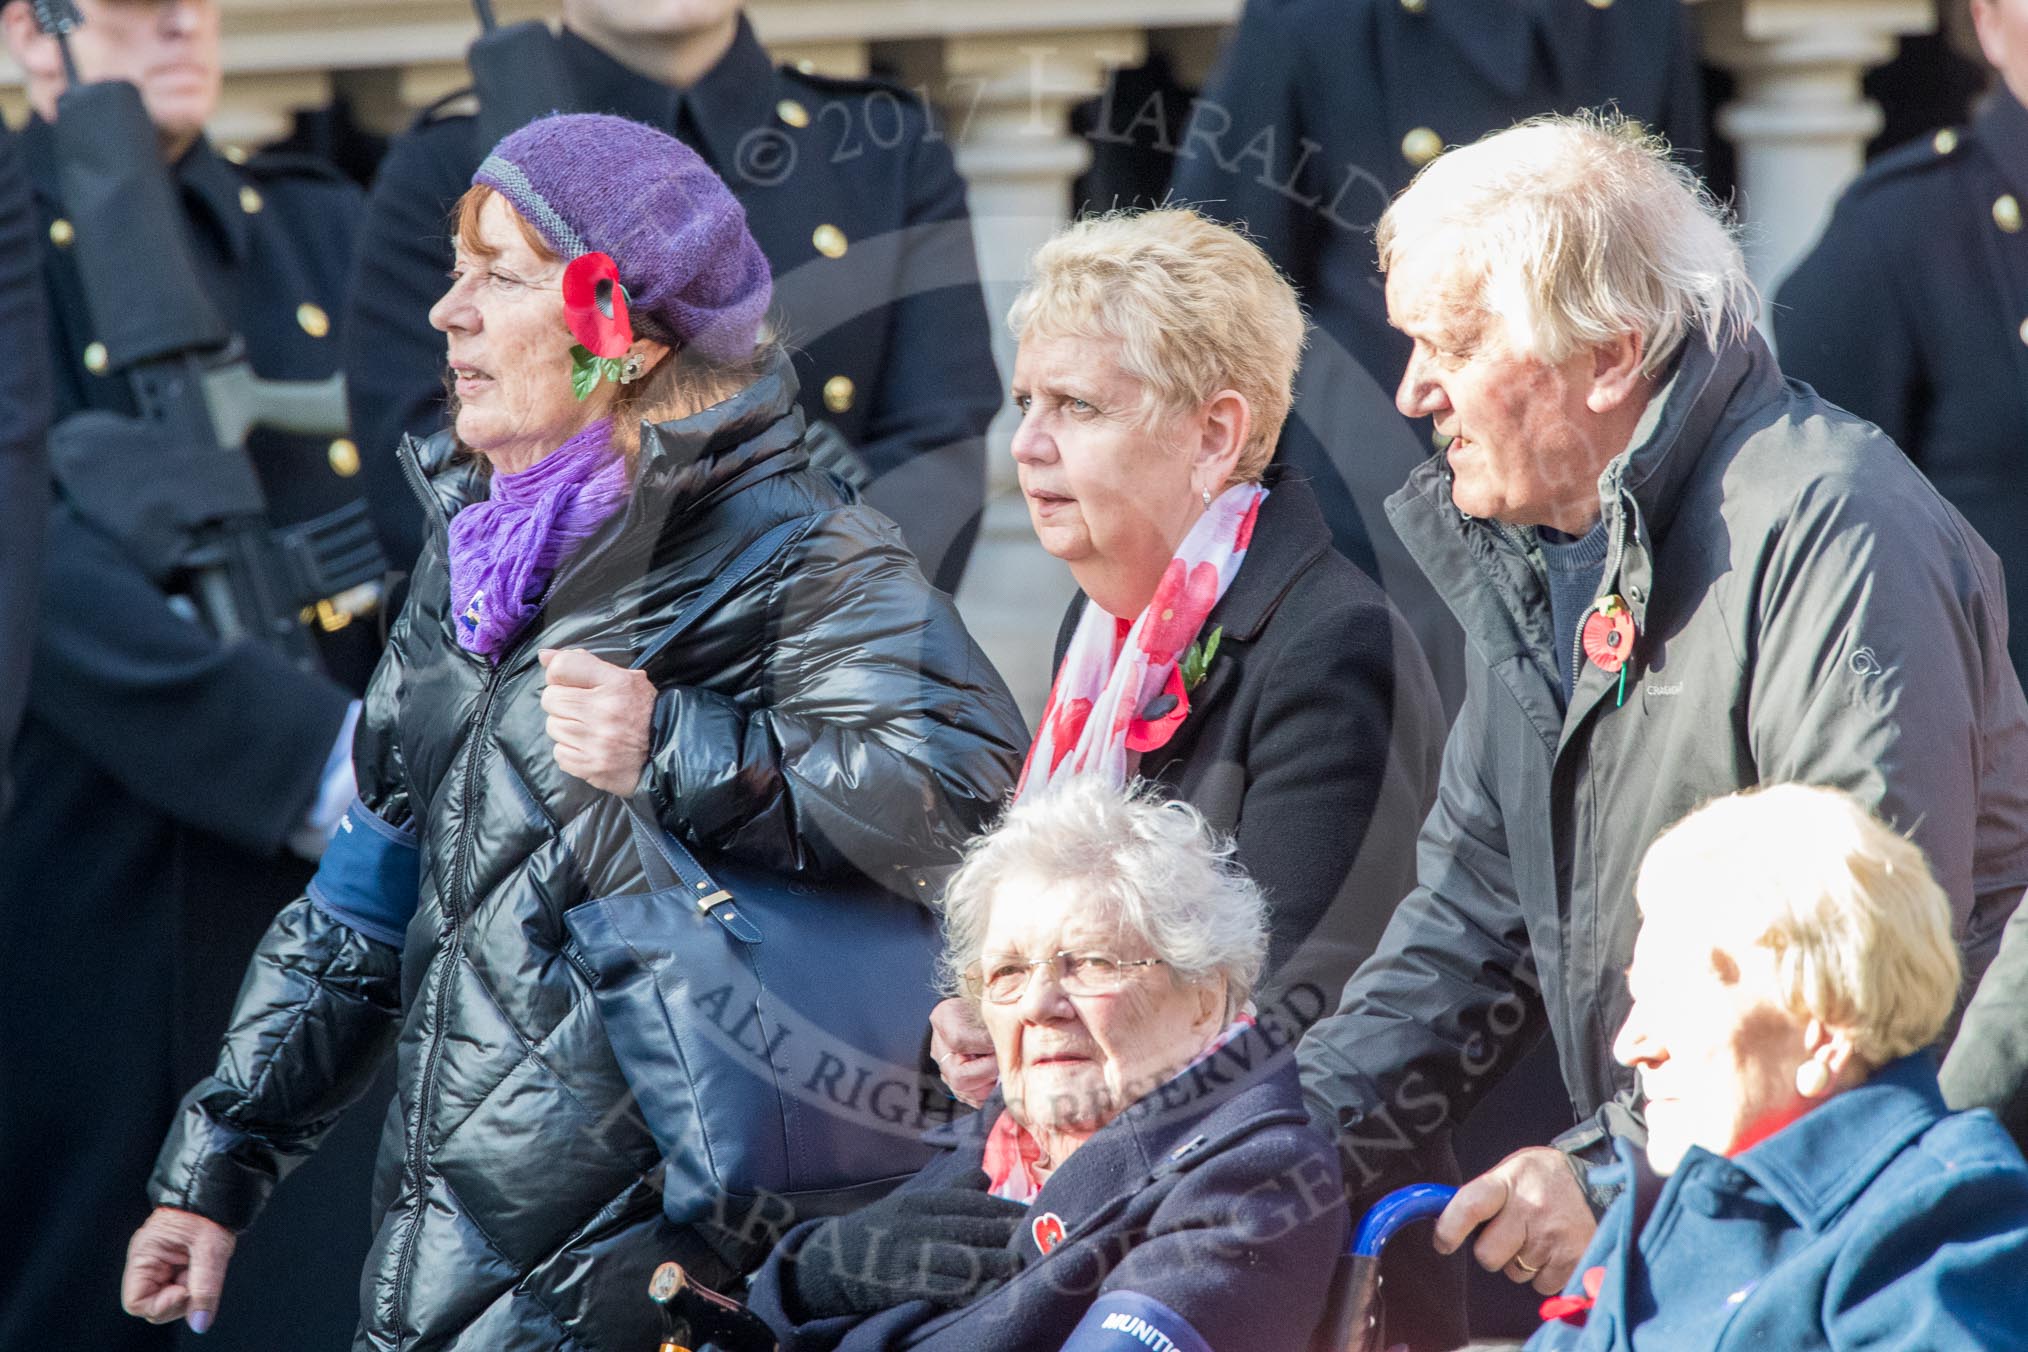 Munitions Workers Association (Group M3, 21 members) during the Royal British Legion March Past on Remembrance Sunday at the Cenotaph, Whitehall, Westminster, London, 11 November 2018, 12:25.